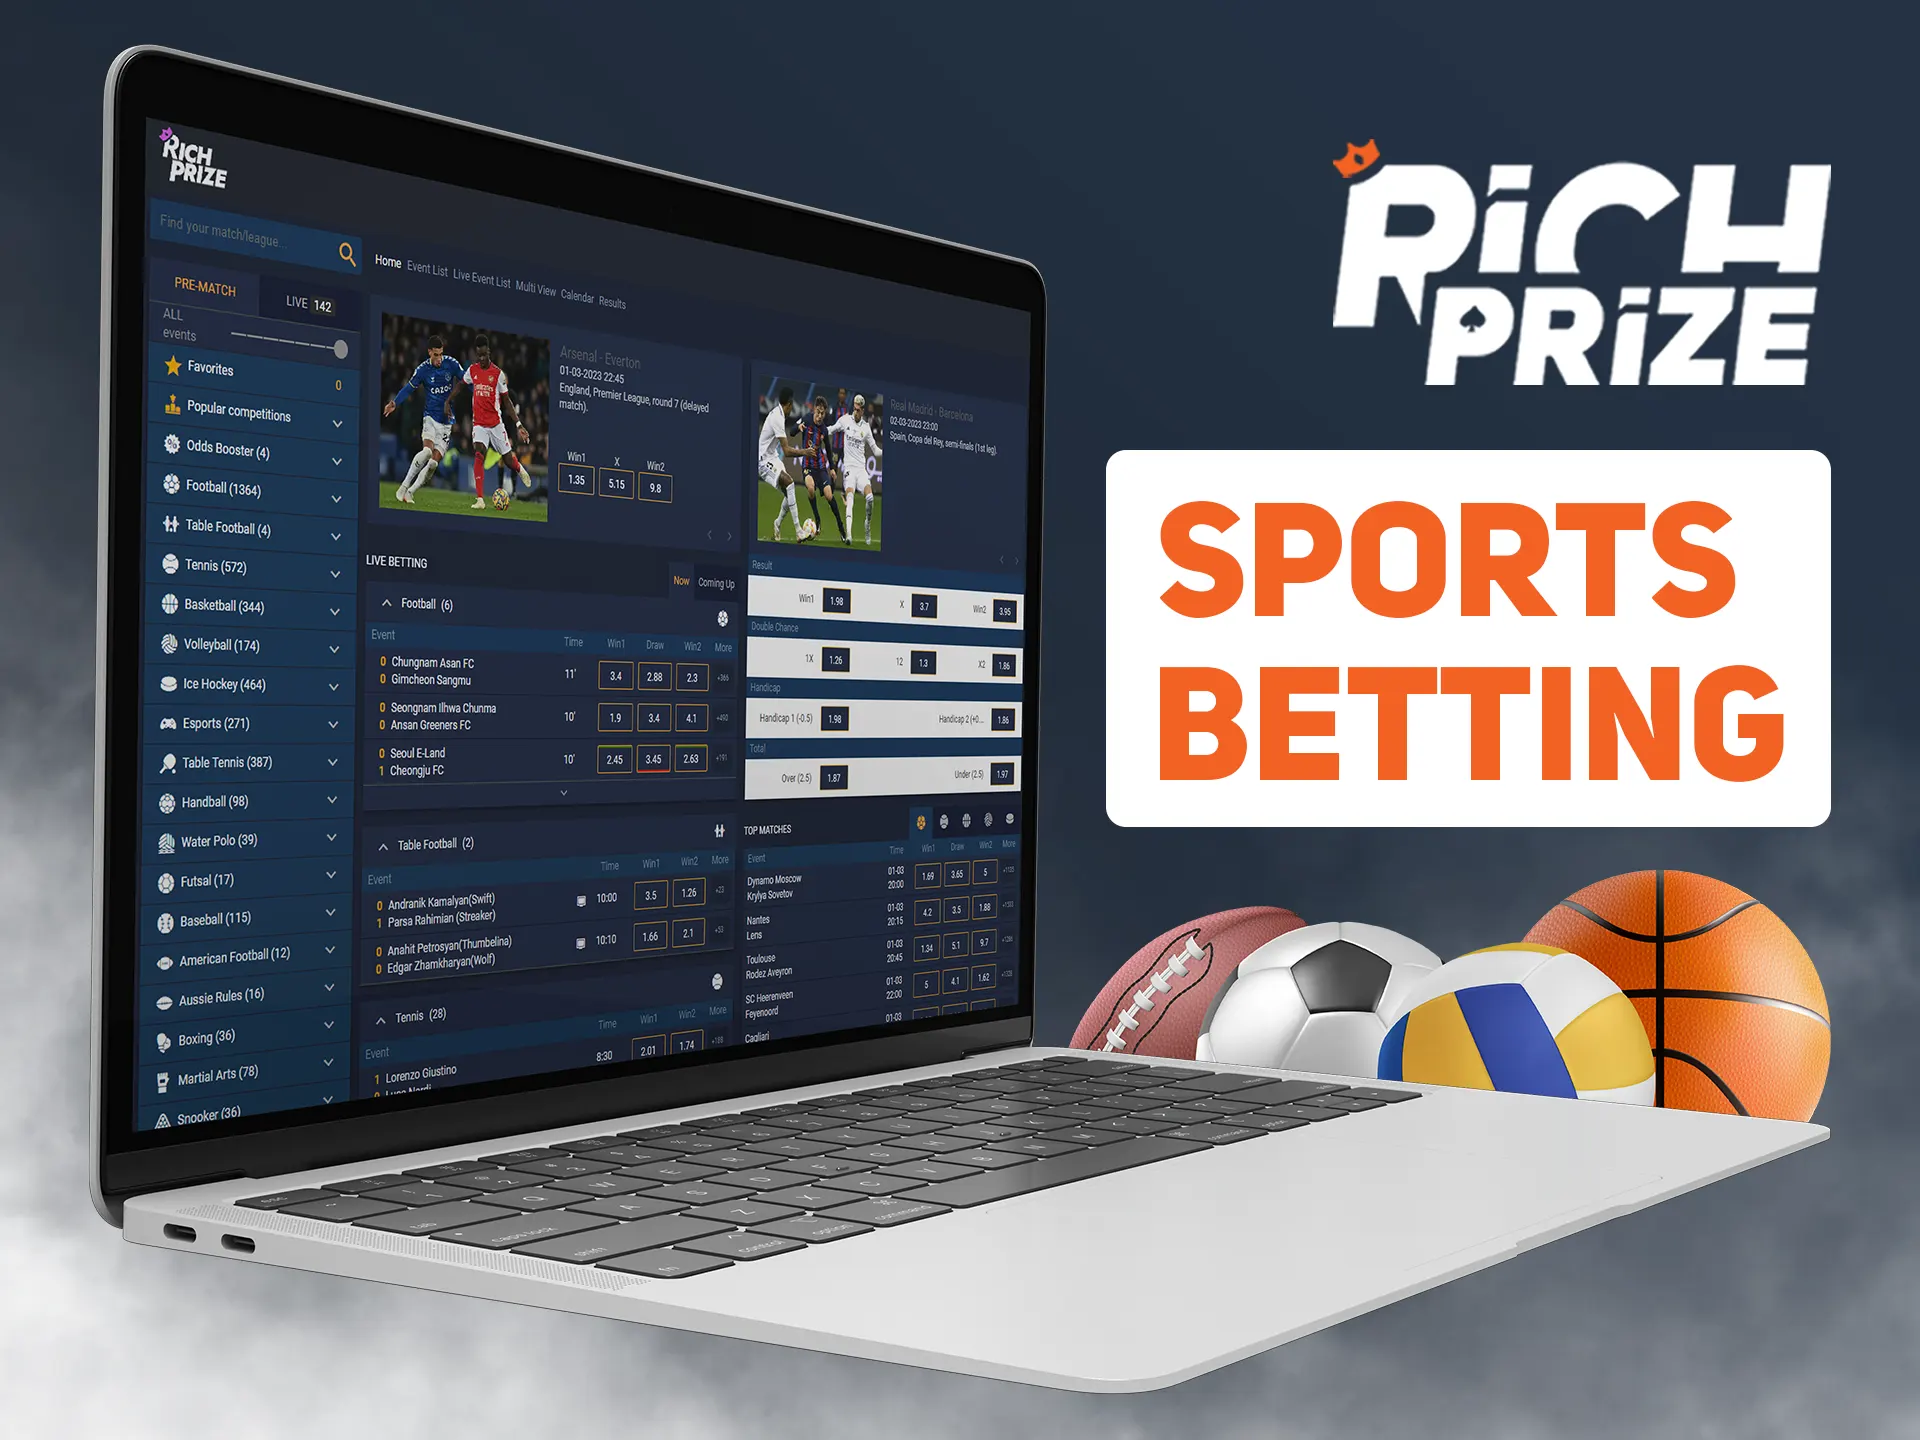 Bet on most exotic sports at Richprize.